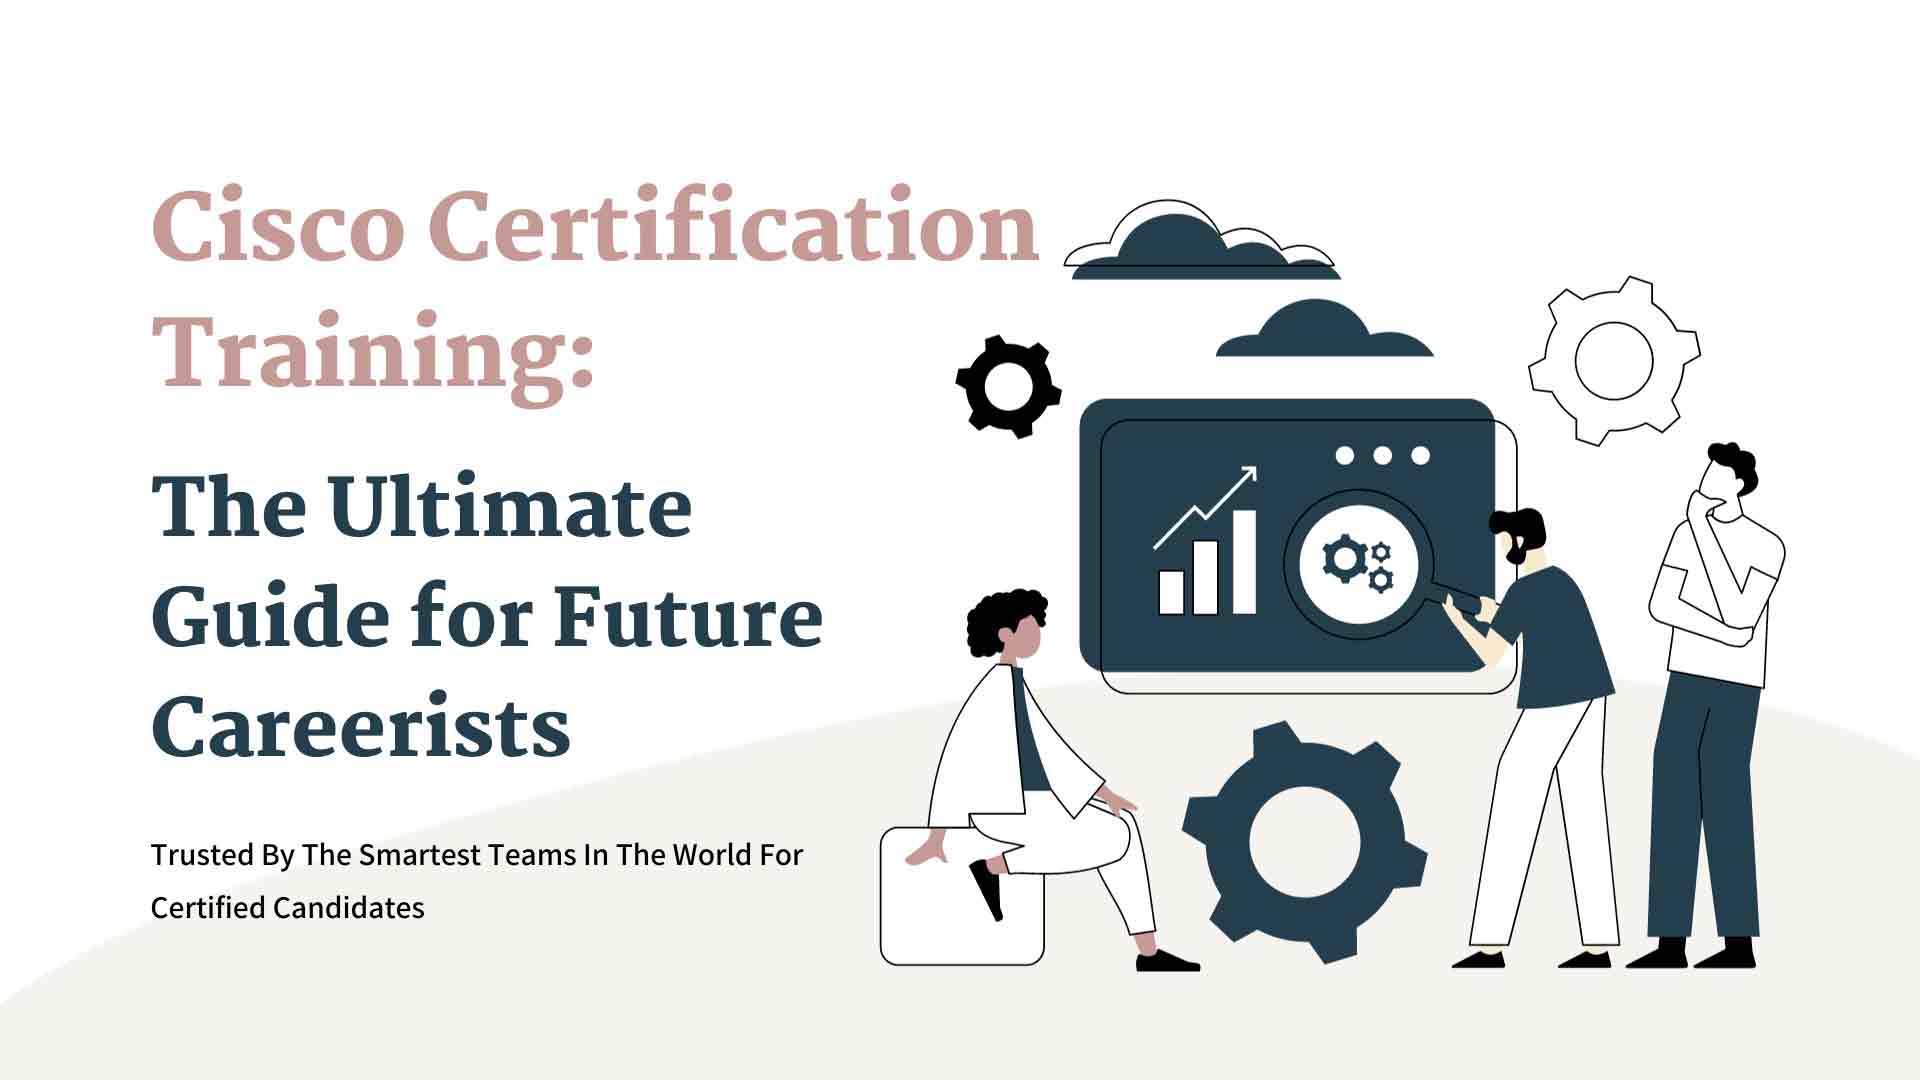 Cisco Certification and Training: The Ultimate Guide for Future Careerists